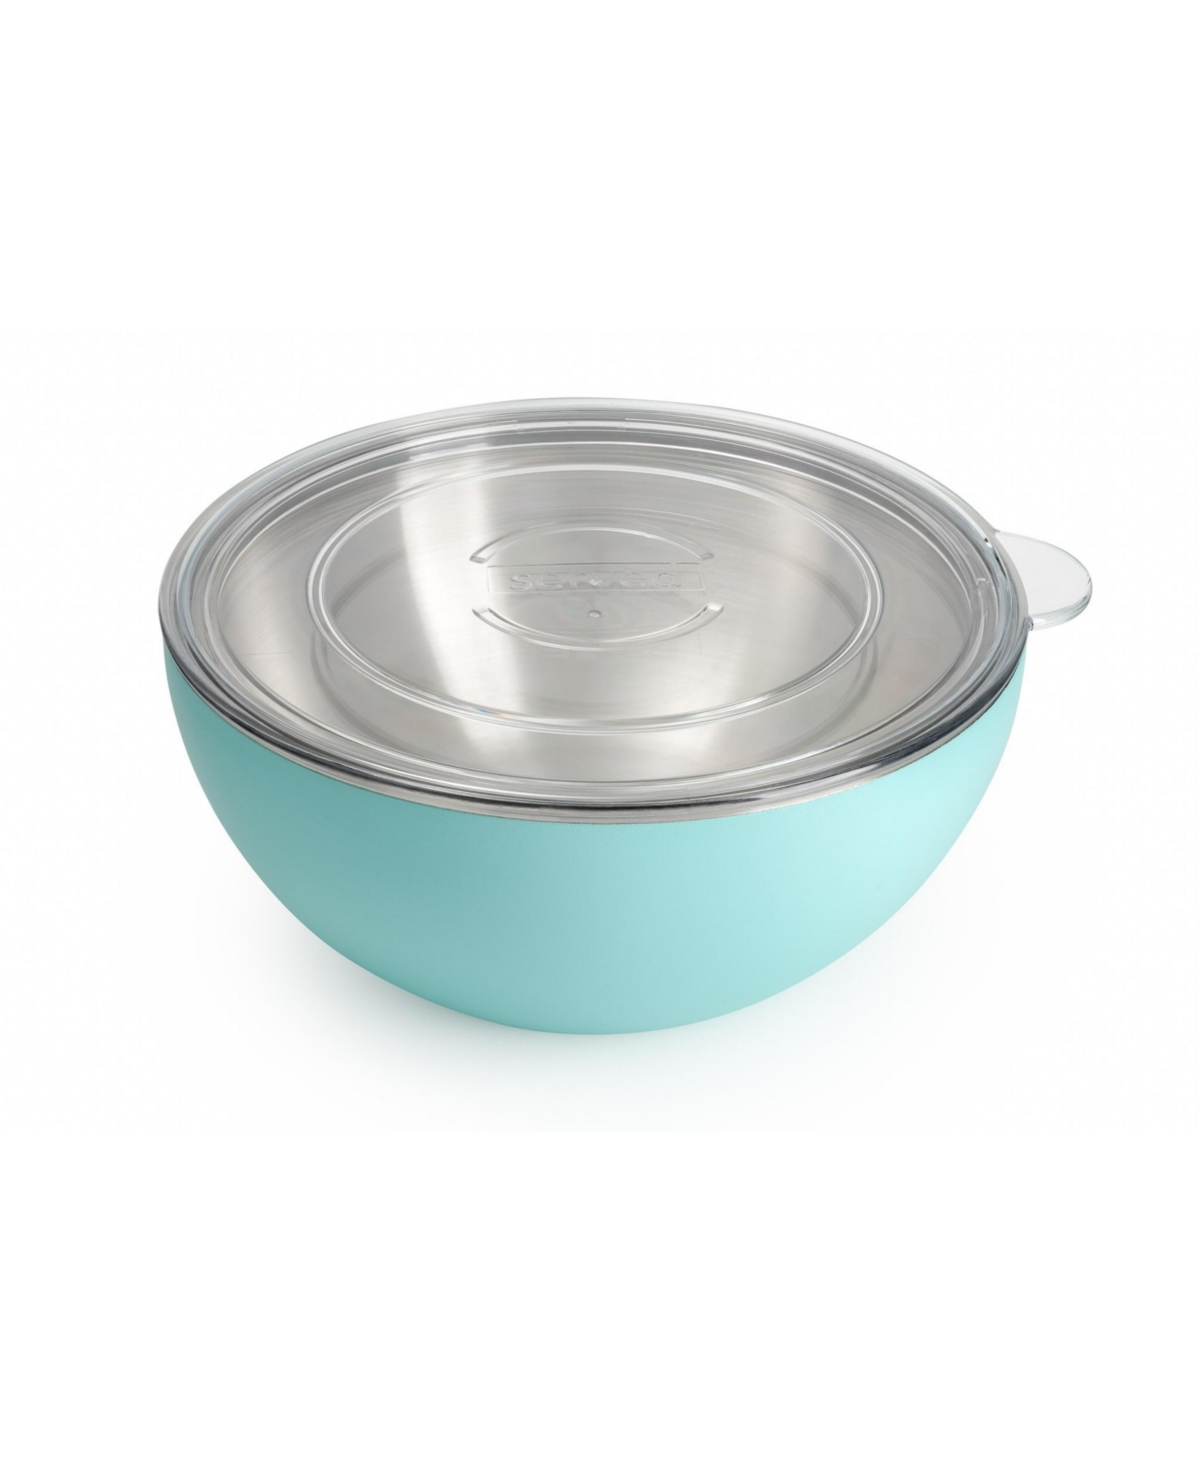 Served Vacuum-insulated Double-walled Copper-lined Stainless Steel Small Serving Bowl, 0.62 Quarts In Blue Lemonade